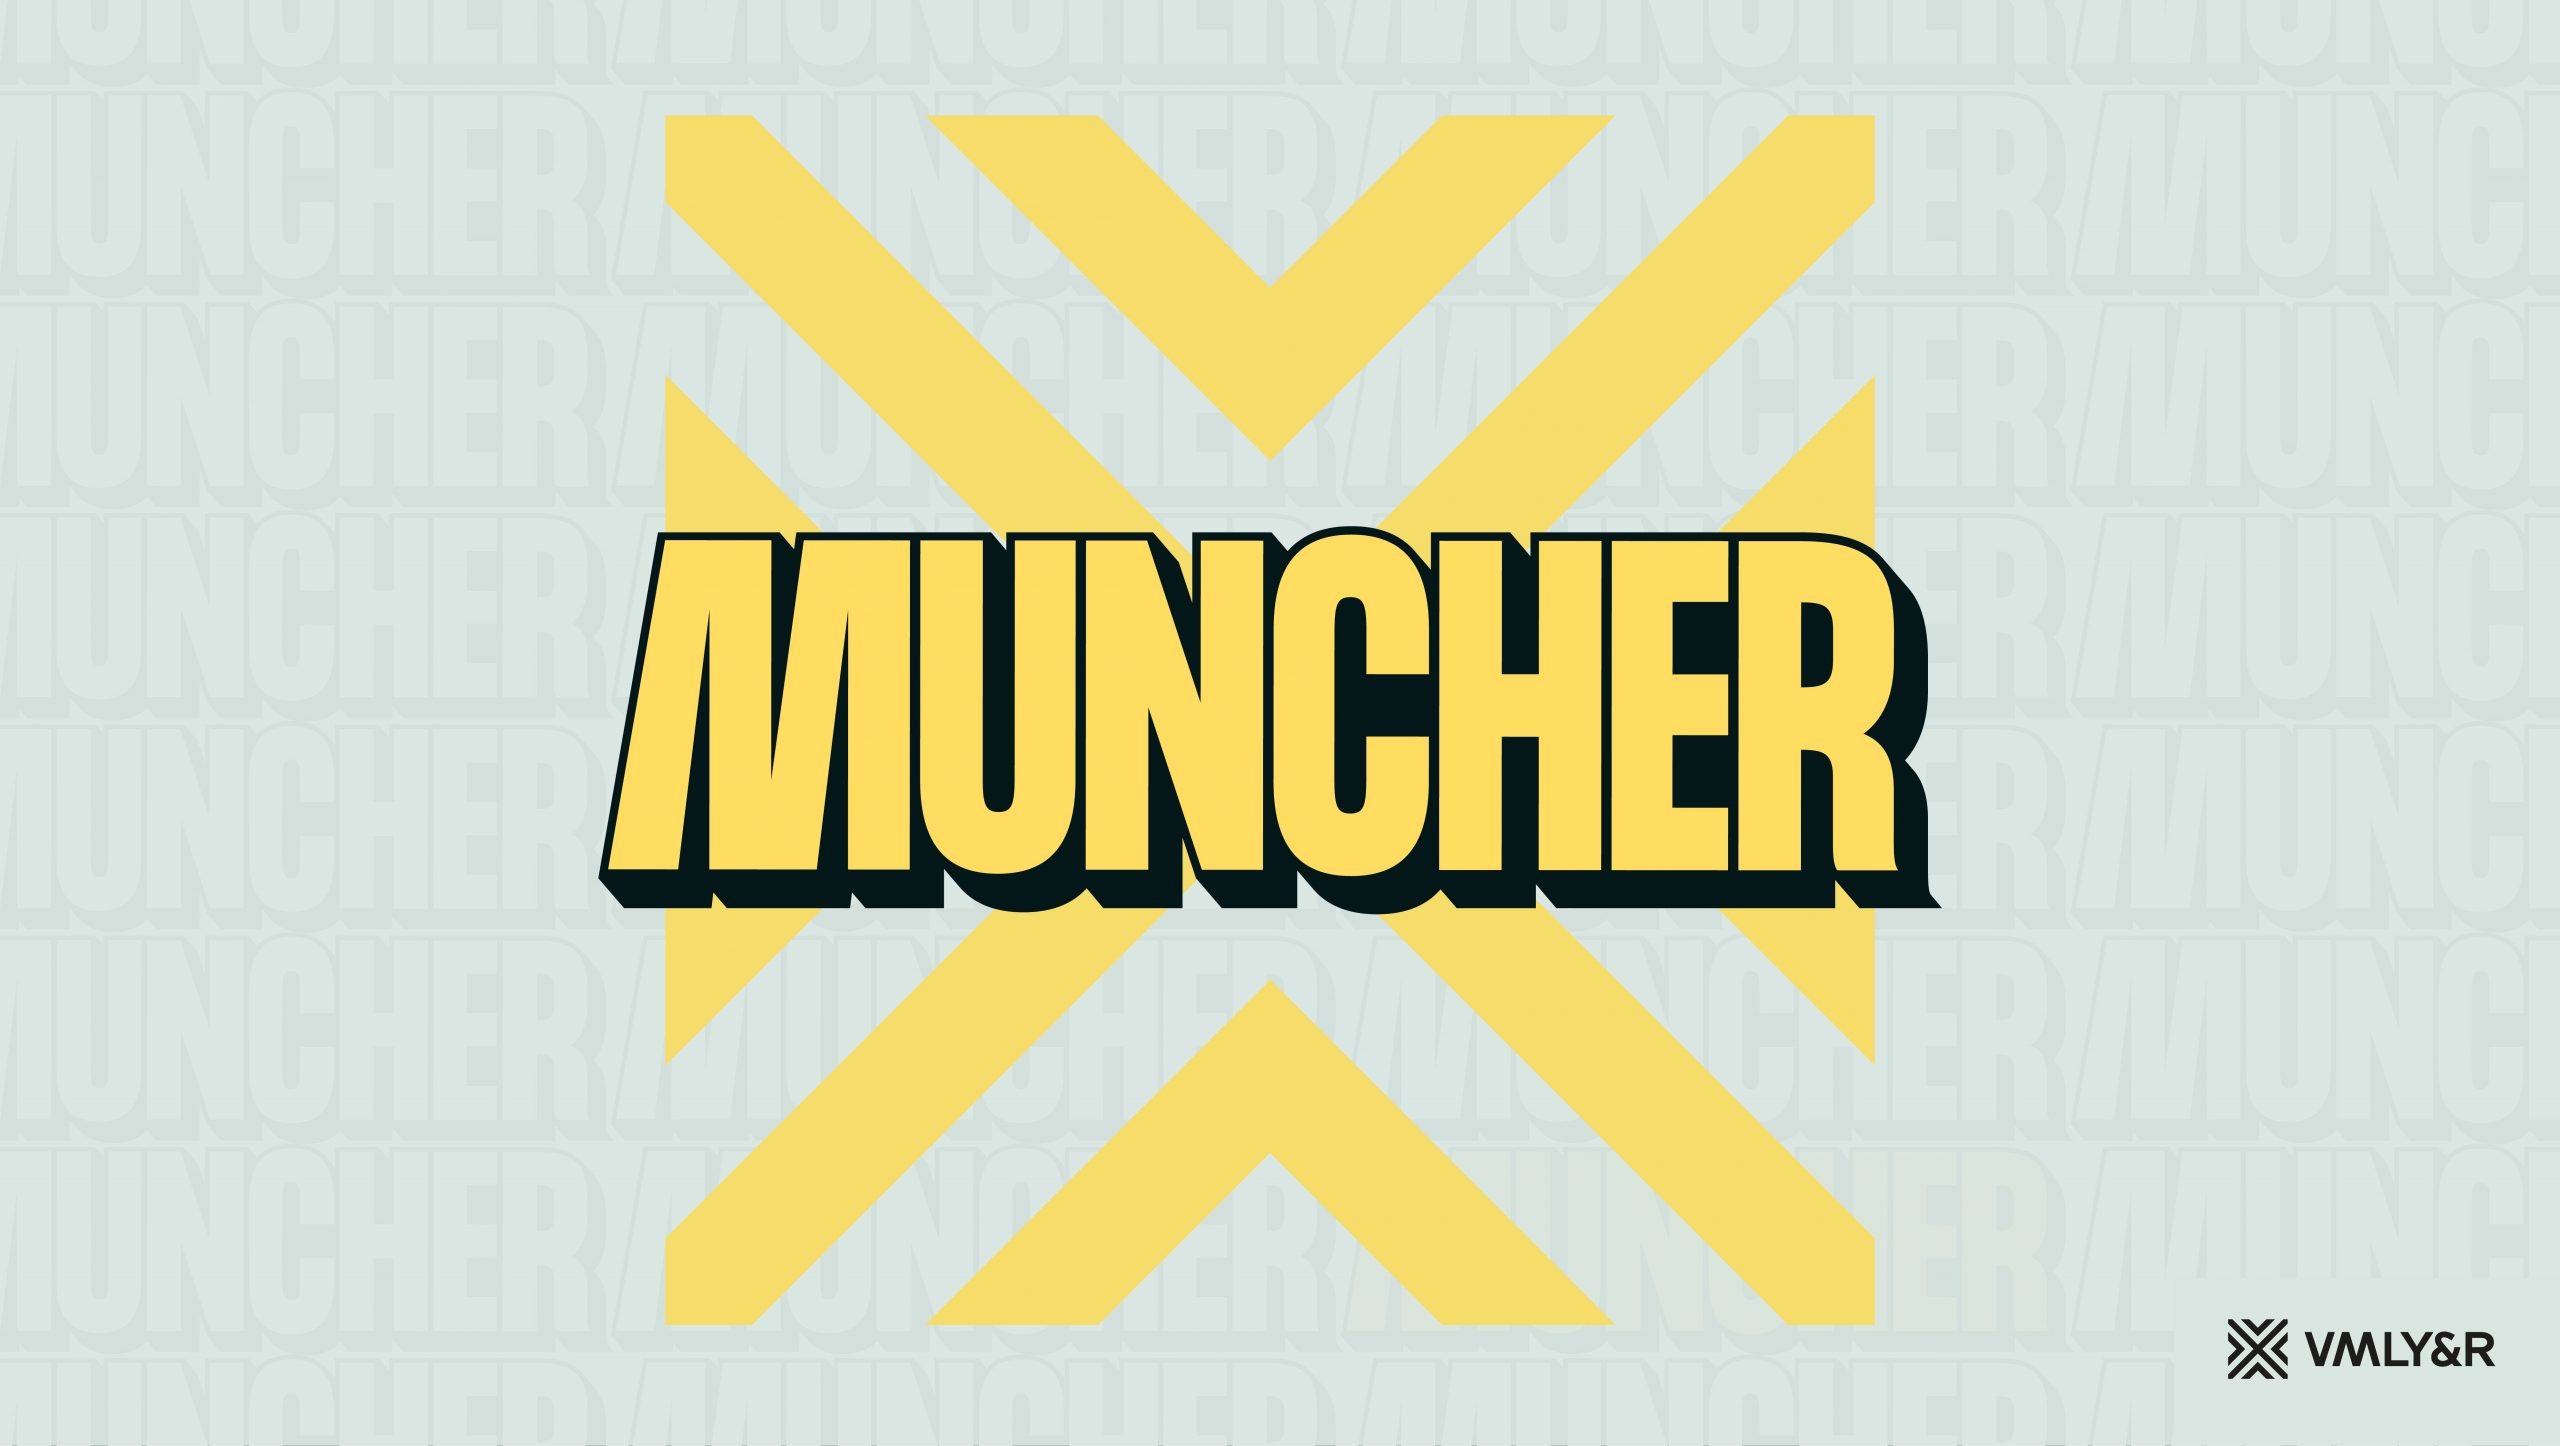 VMLY&R Colombia chosen by MUNCHER as its creative agency